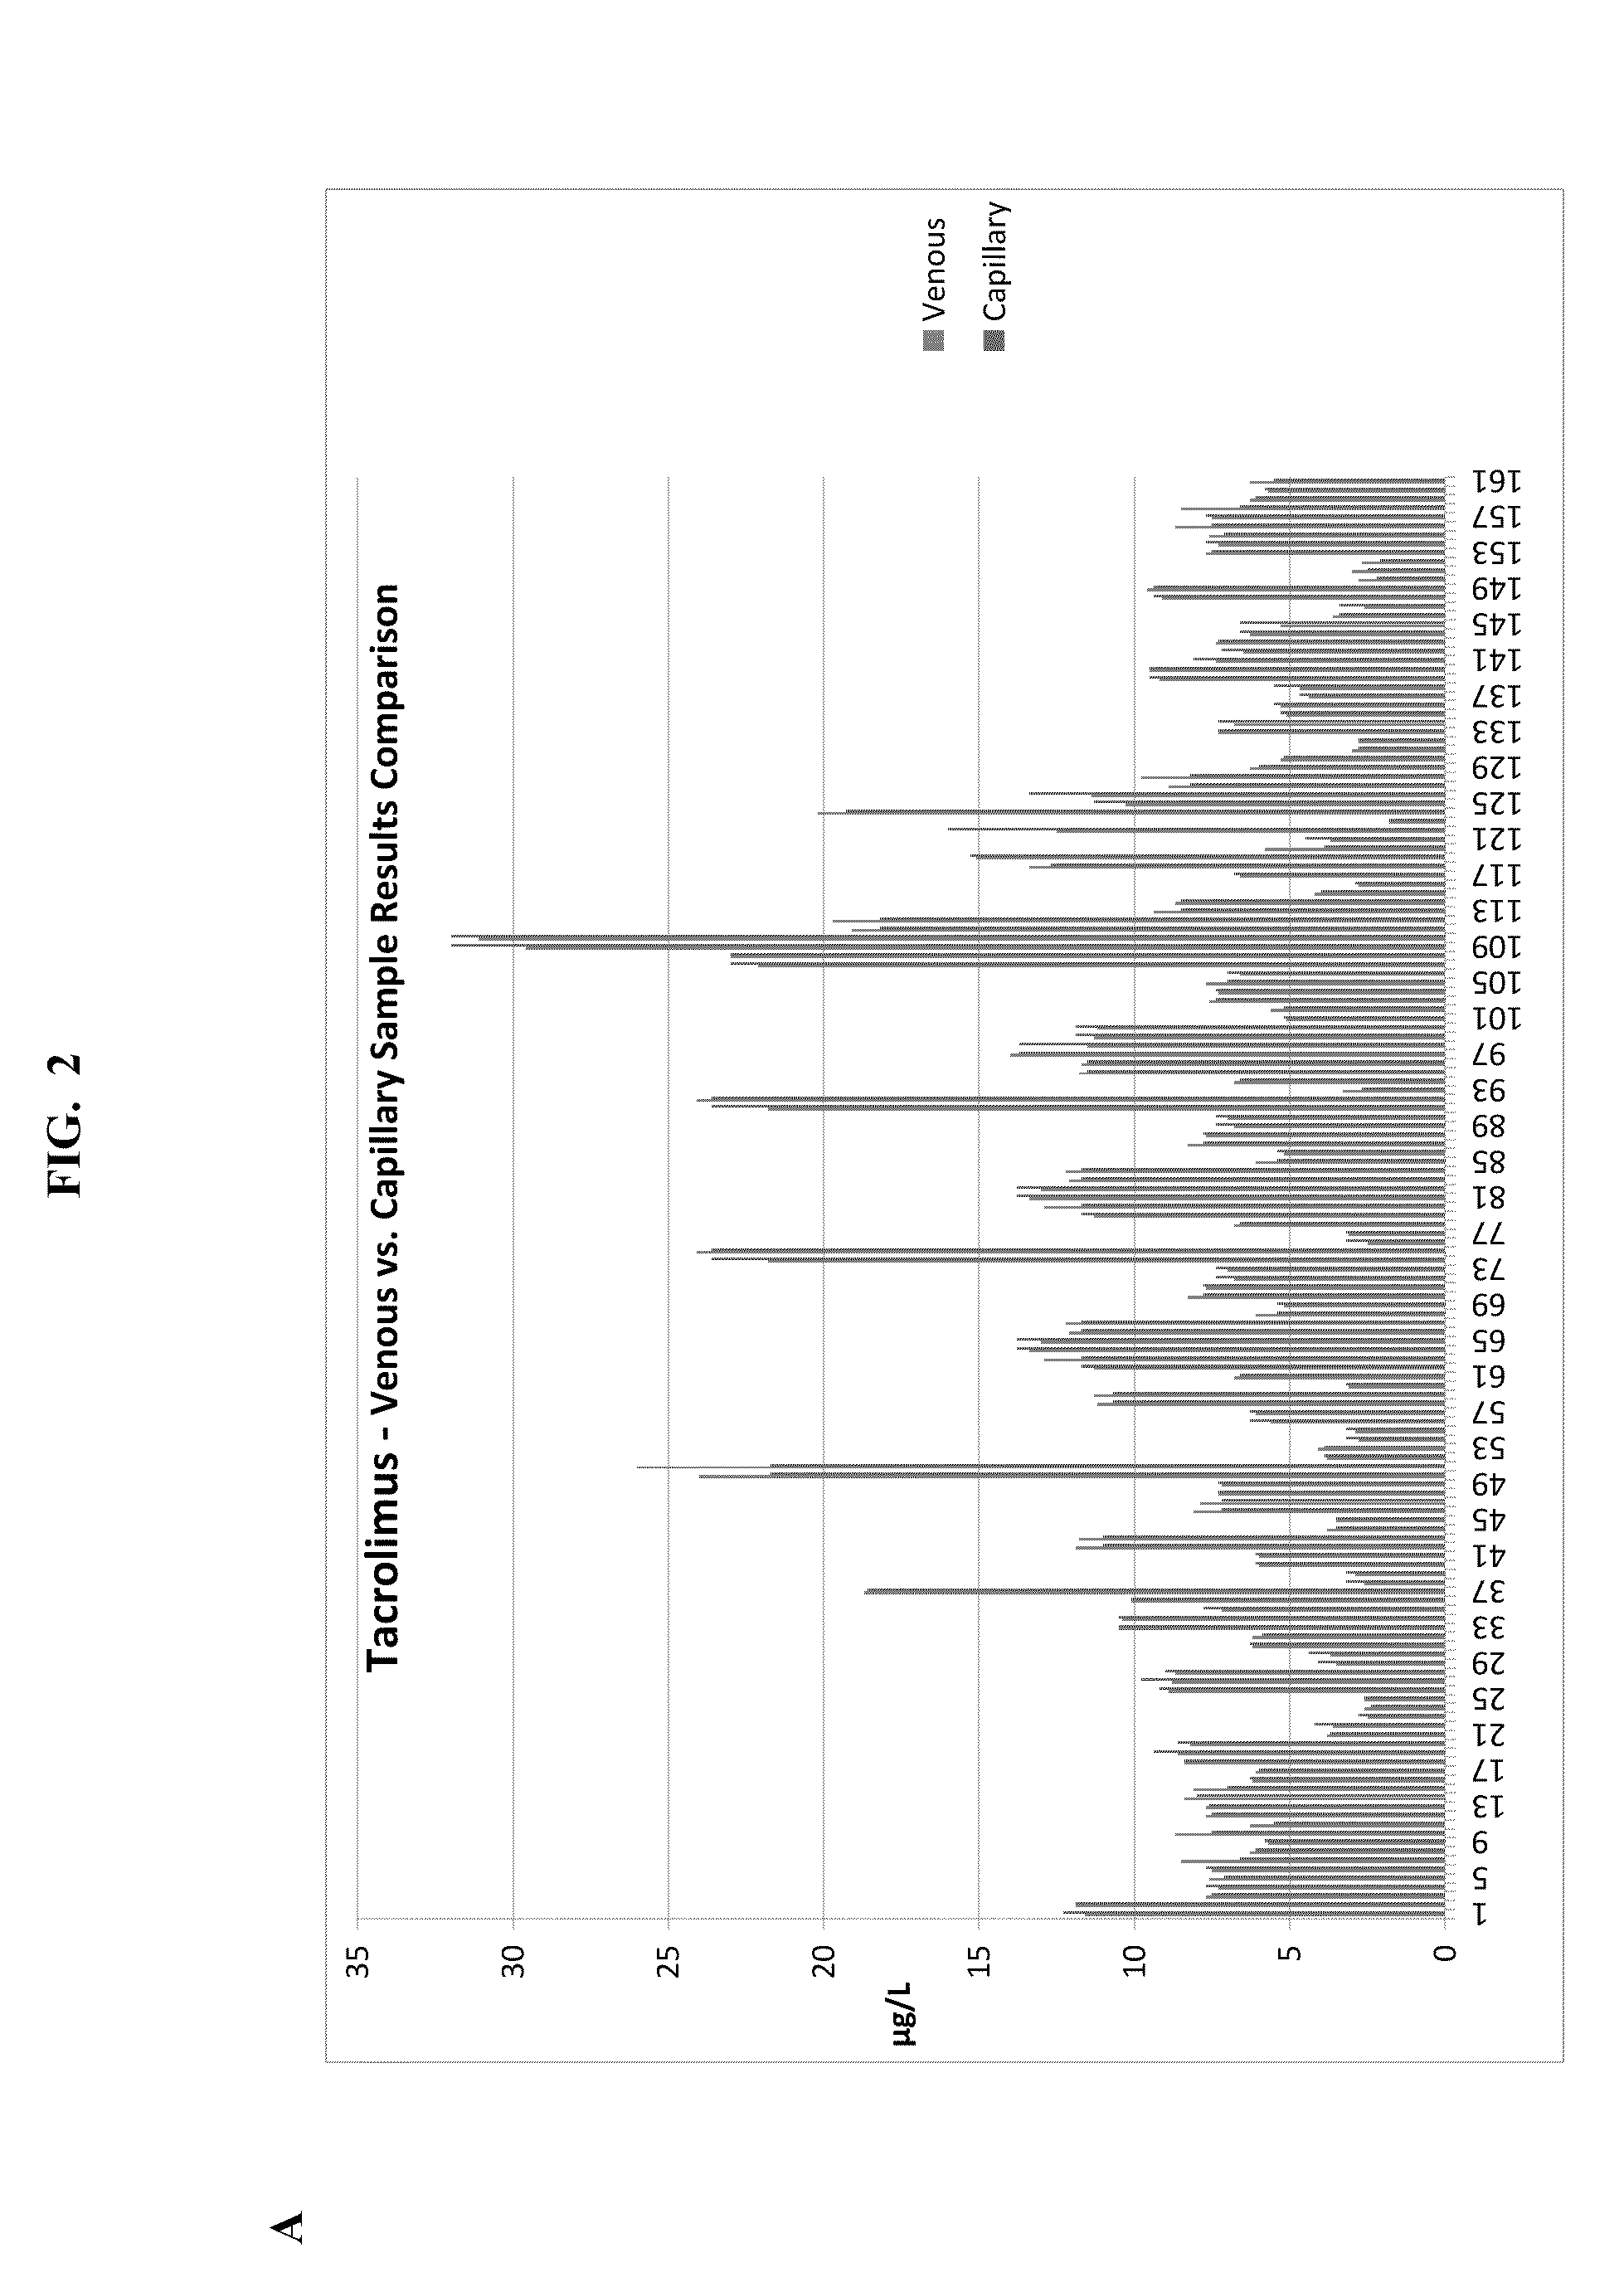 Methods for Monitoring Immunosuppressant Drug Levels, Renal Function, and Hepatic Function Using Small Volume Samples